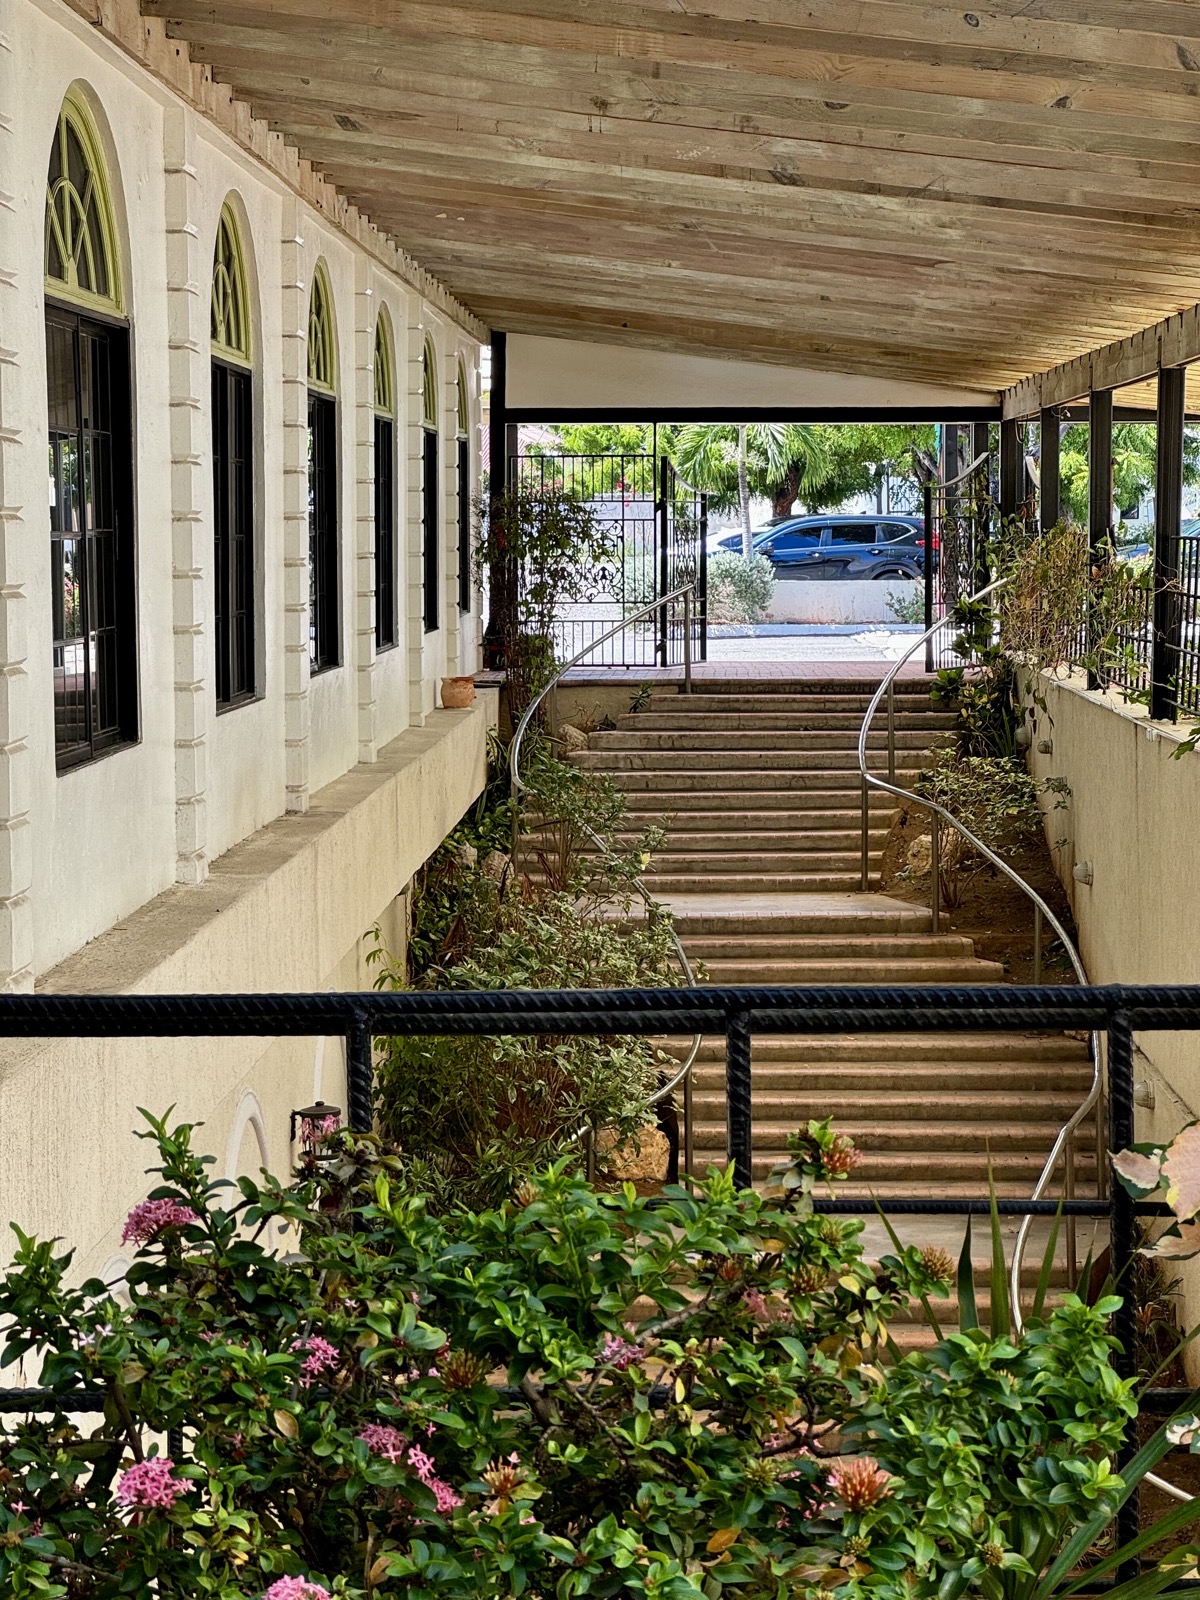 Green flowering bushes in the foreground in front a of a staircase with winding metal rails and windows with arches in a beige, stone building to the left.